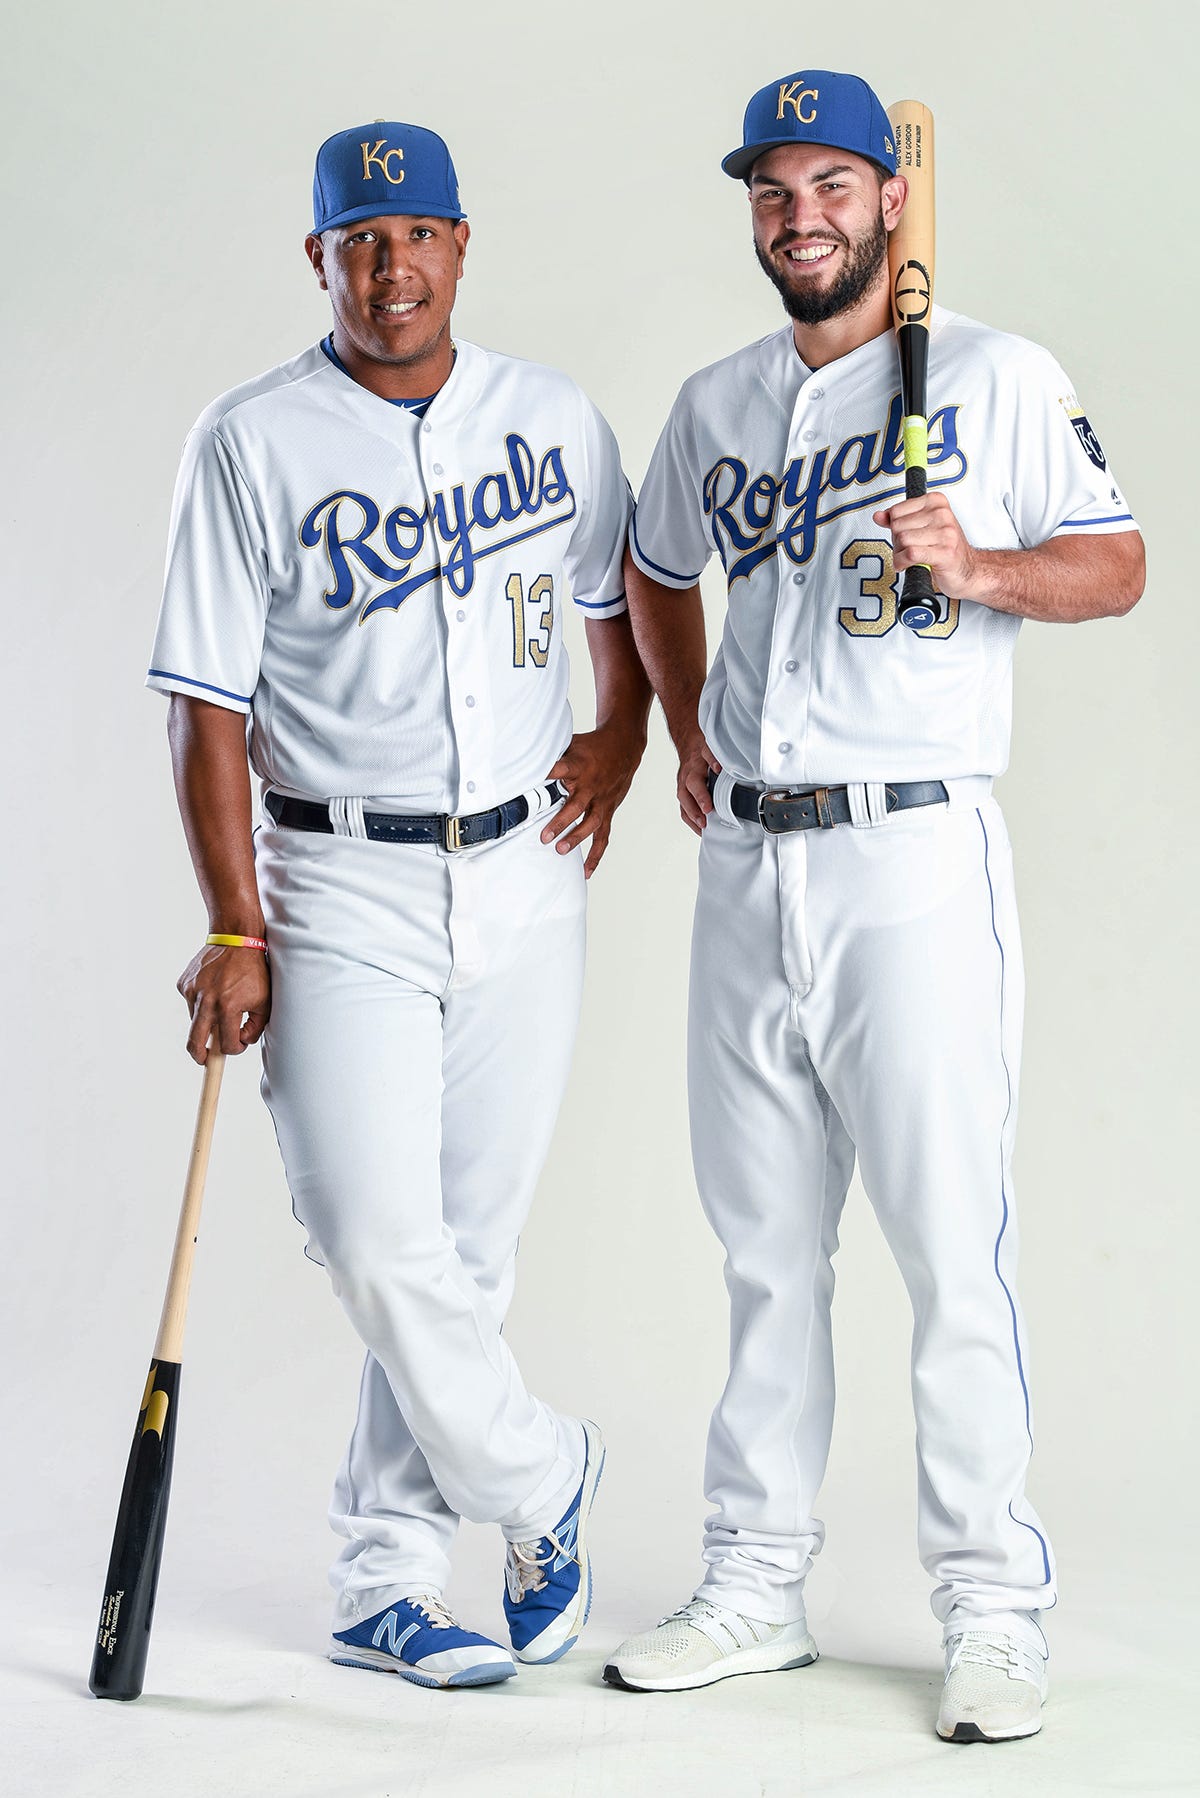 royals opening day jerseys